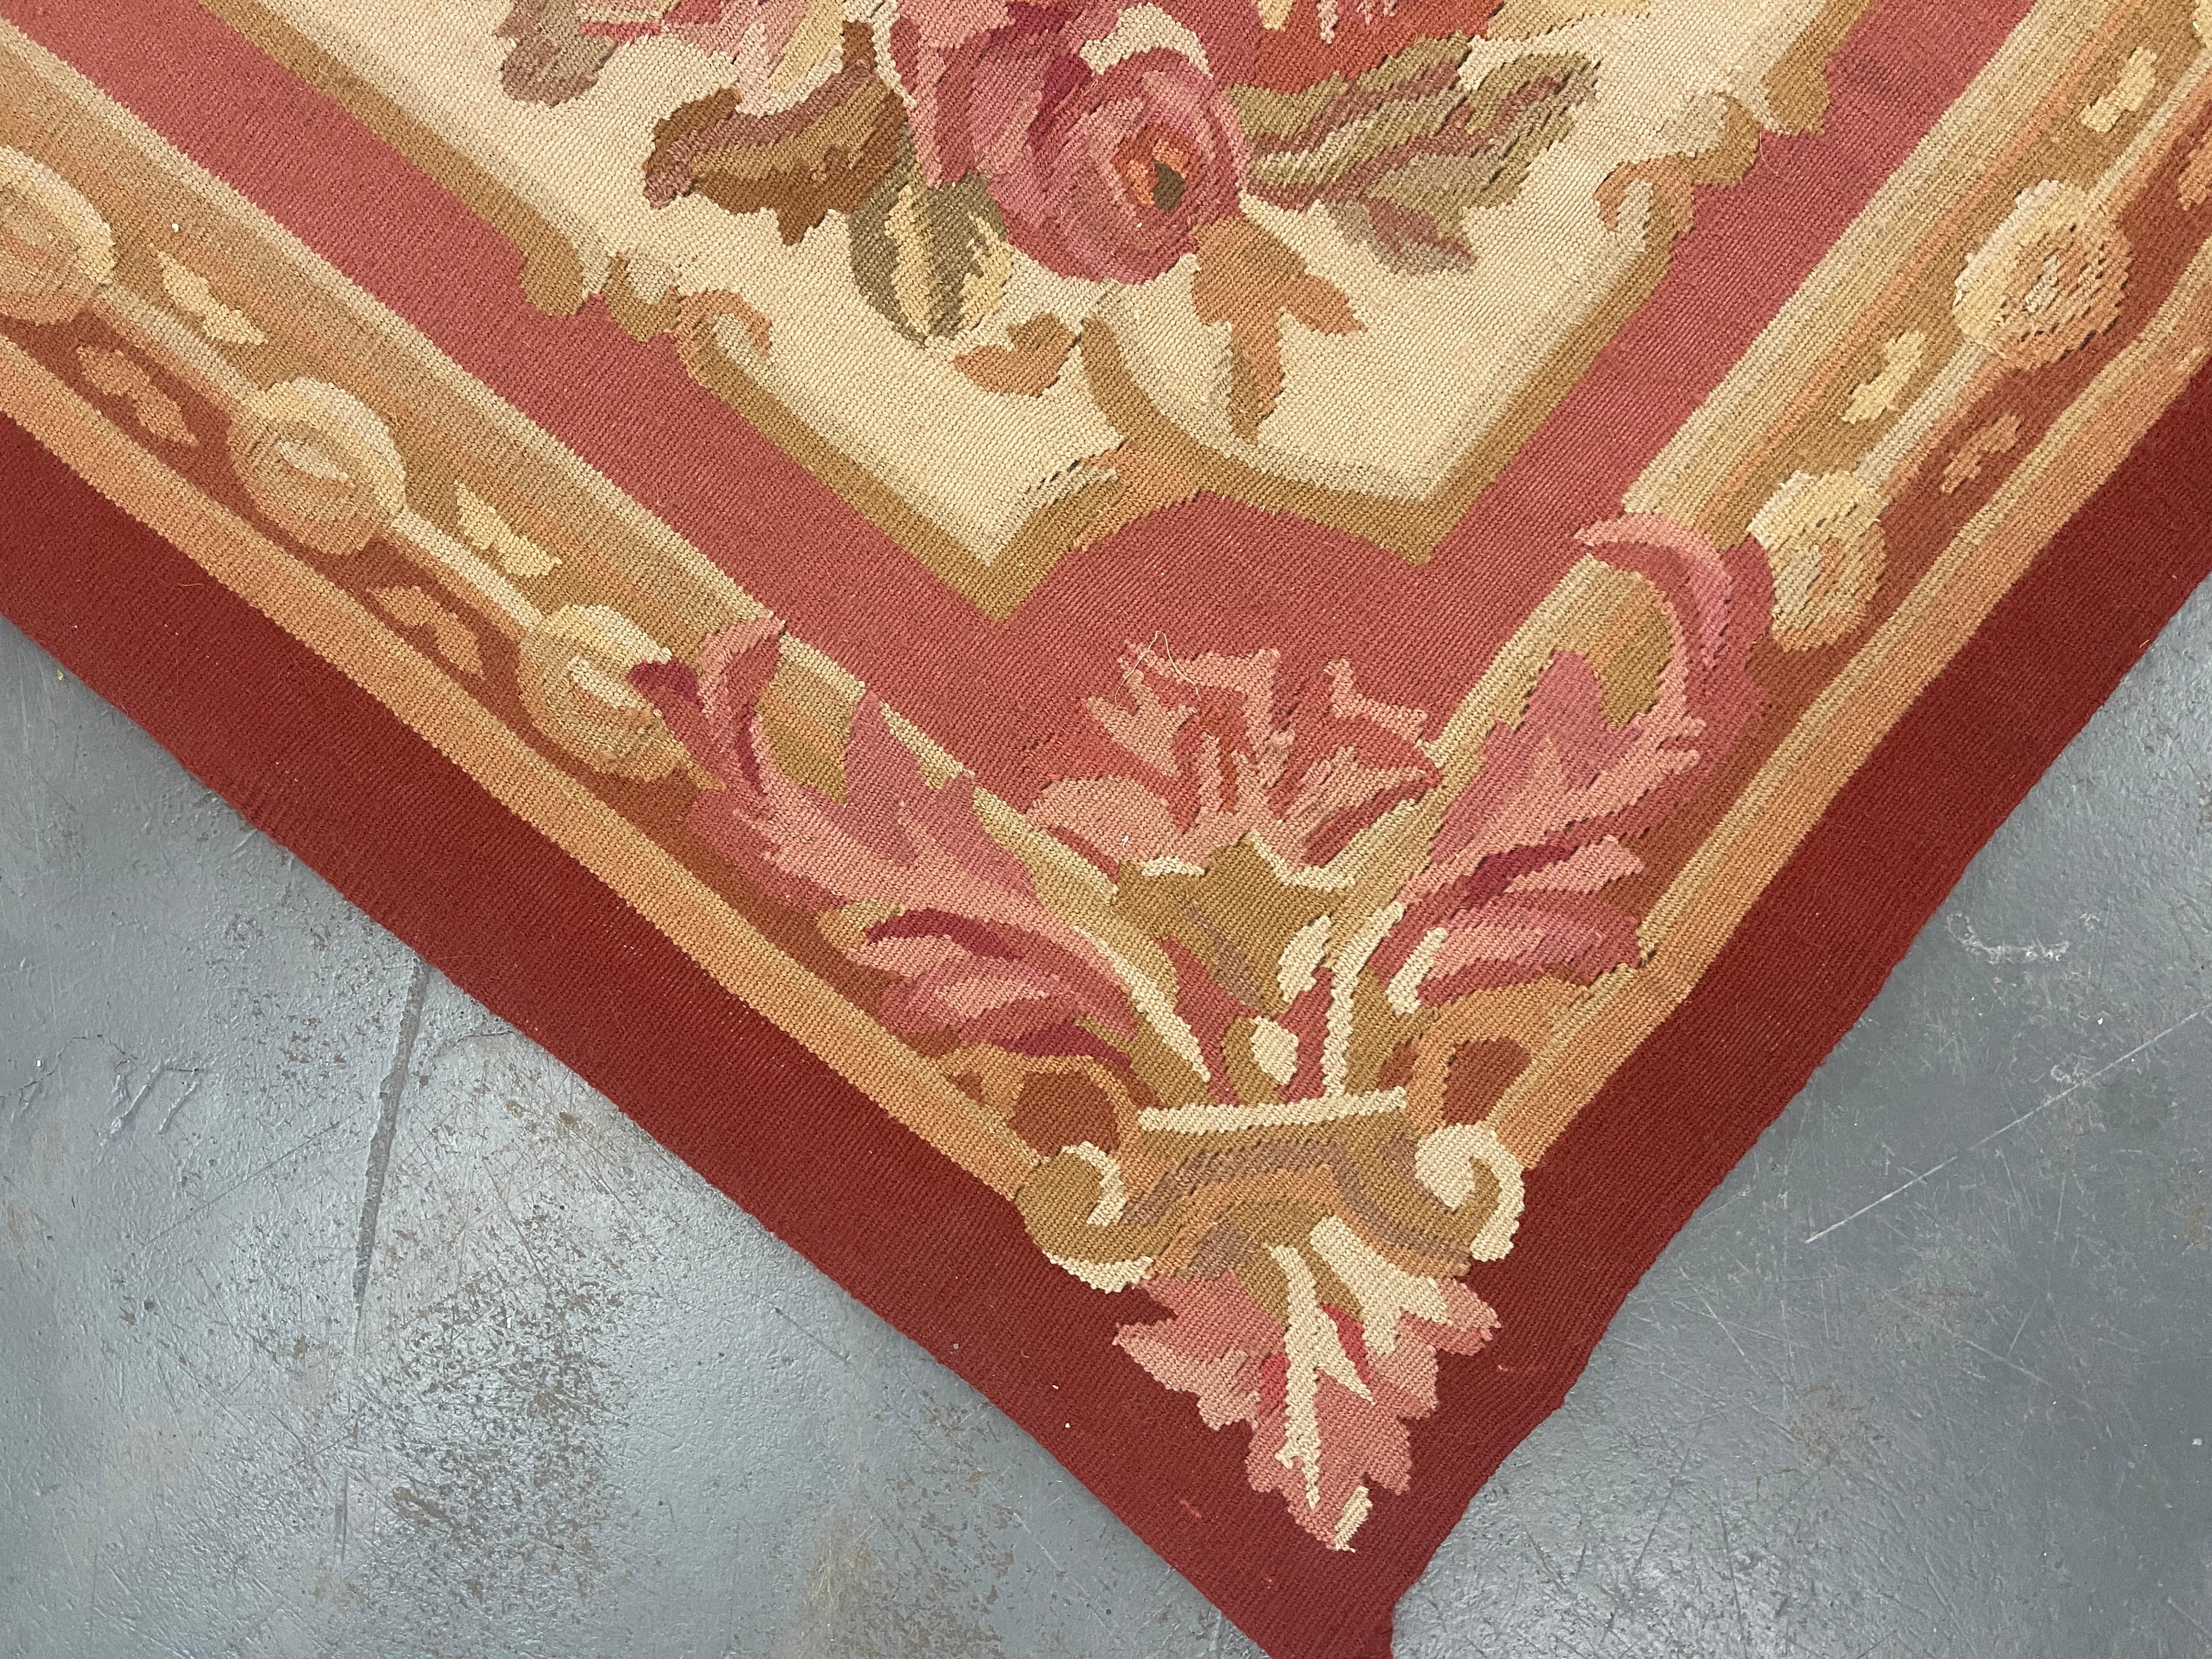 Vegetable Dyed Handmade Carpet Vintage Aubusson Rug 1980 French- Red and Beige Wool Rugs For Sale